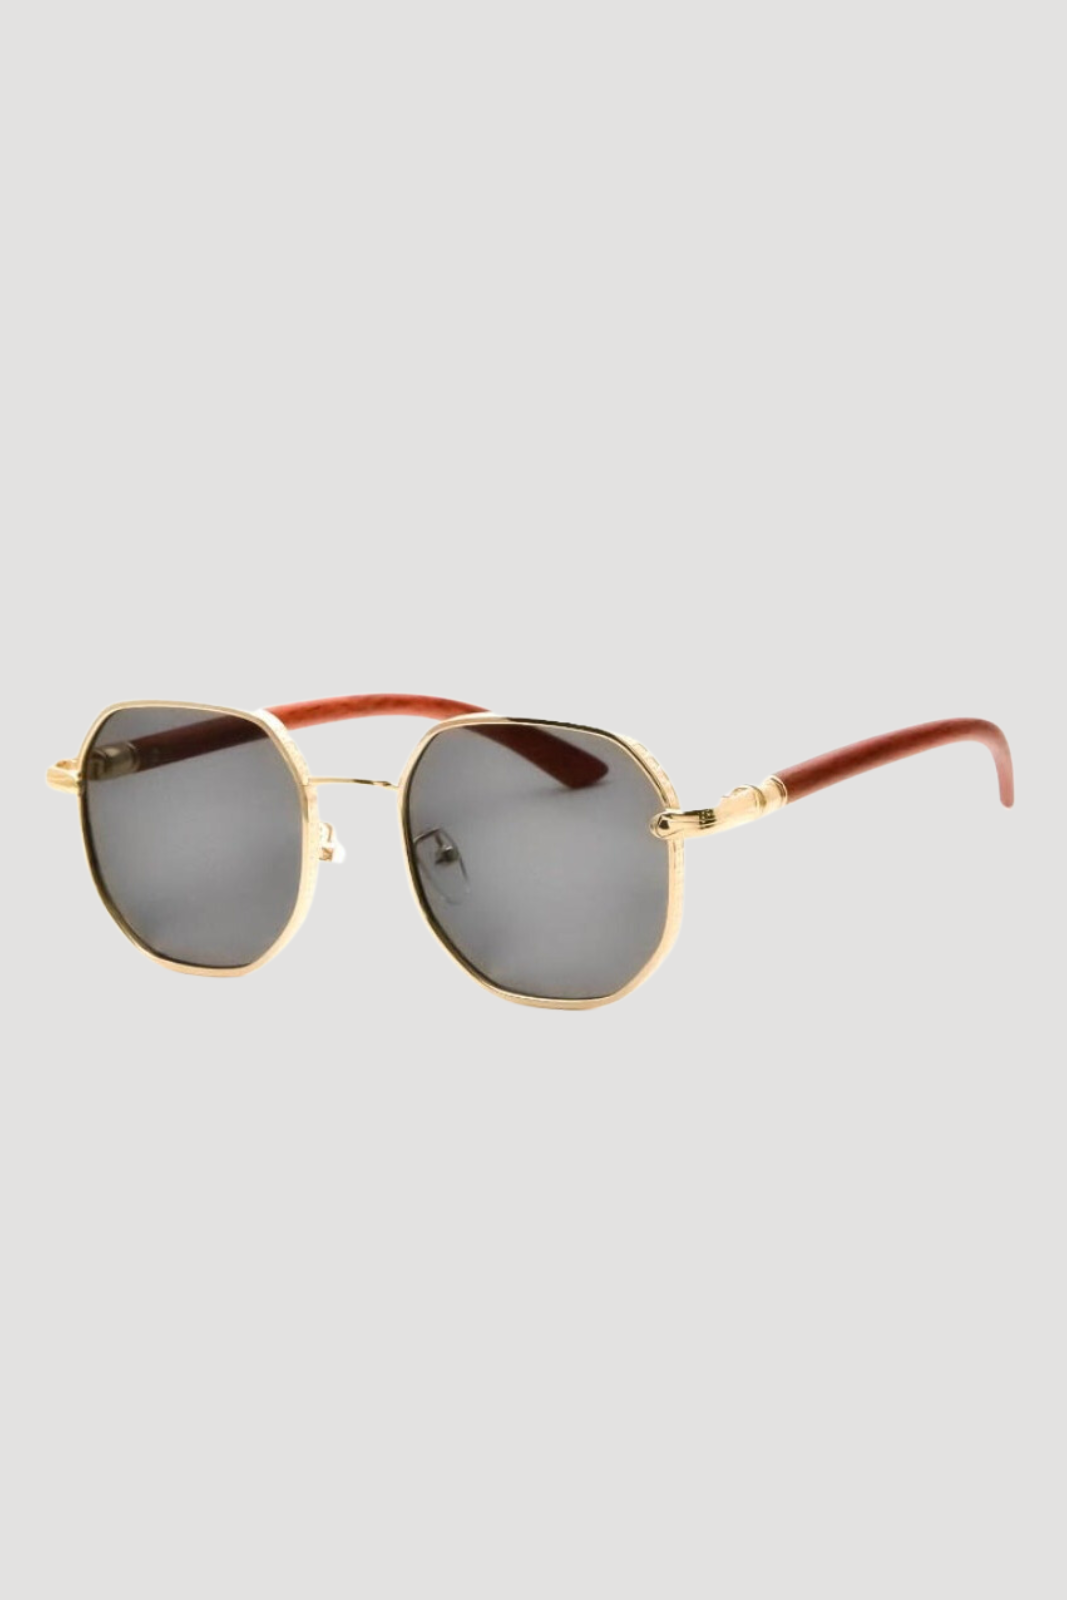 The Cassidy Timber Sunglasses